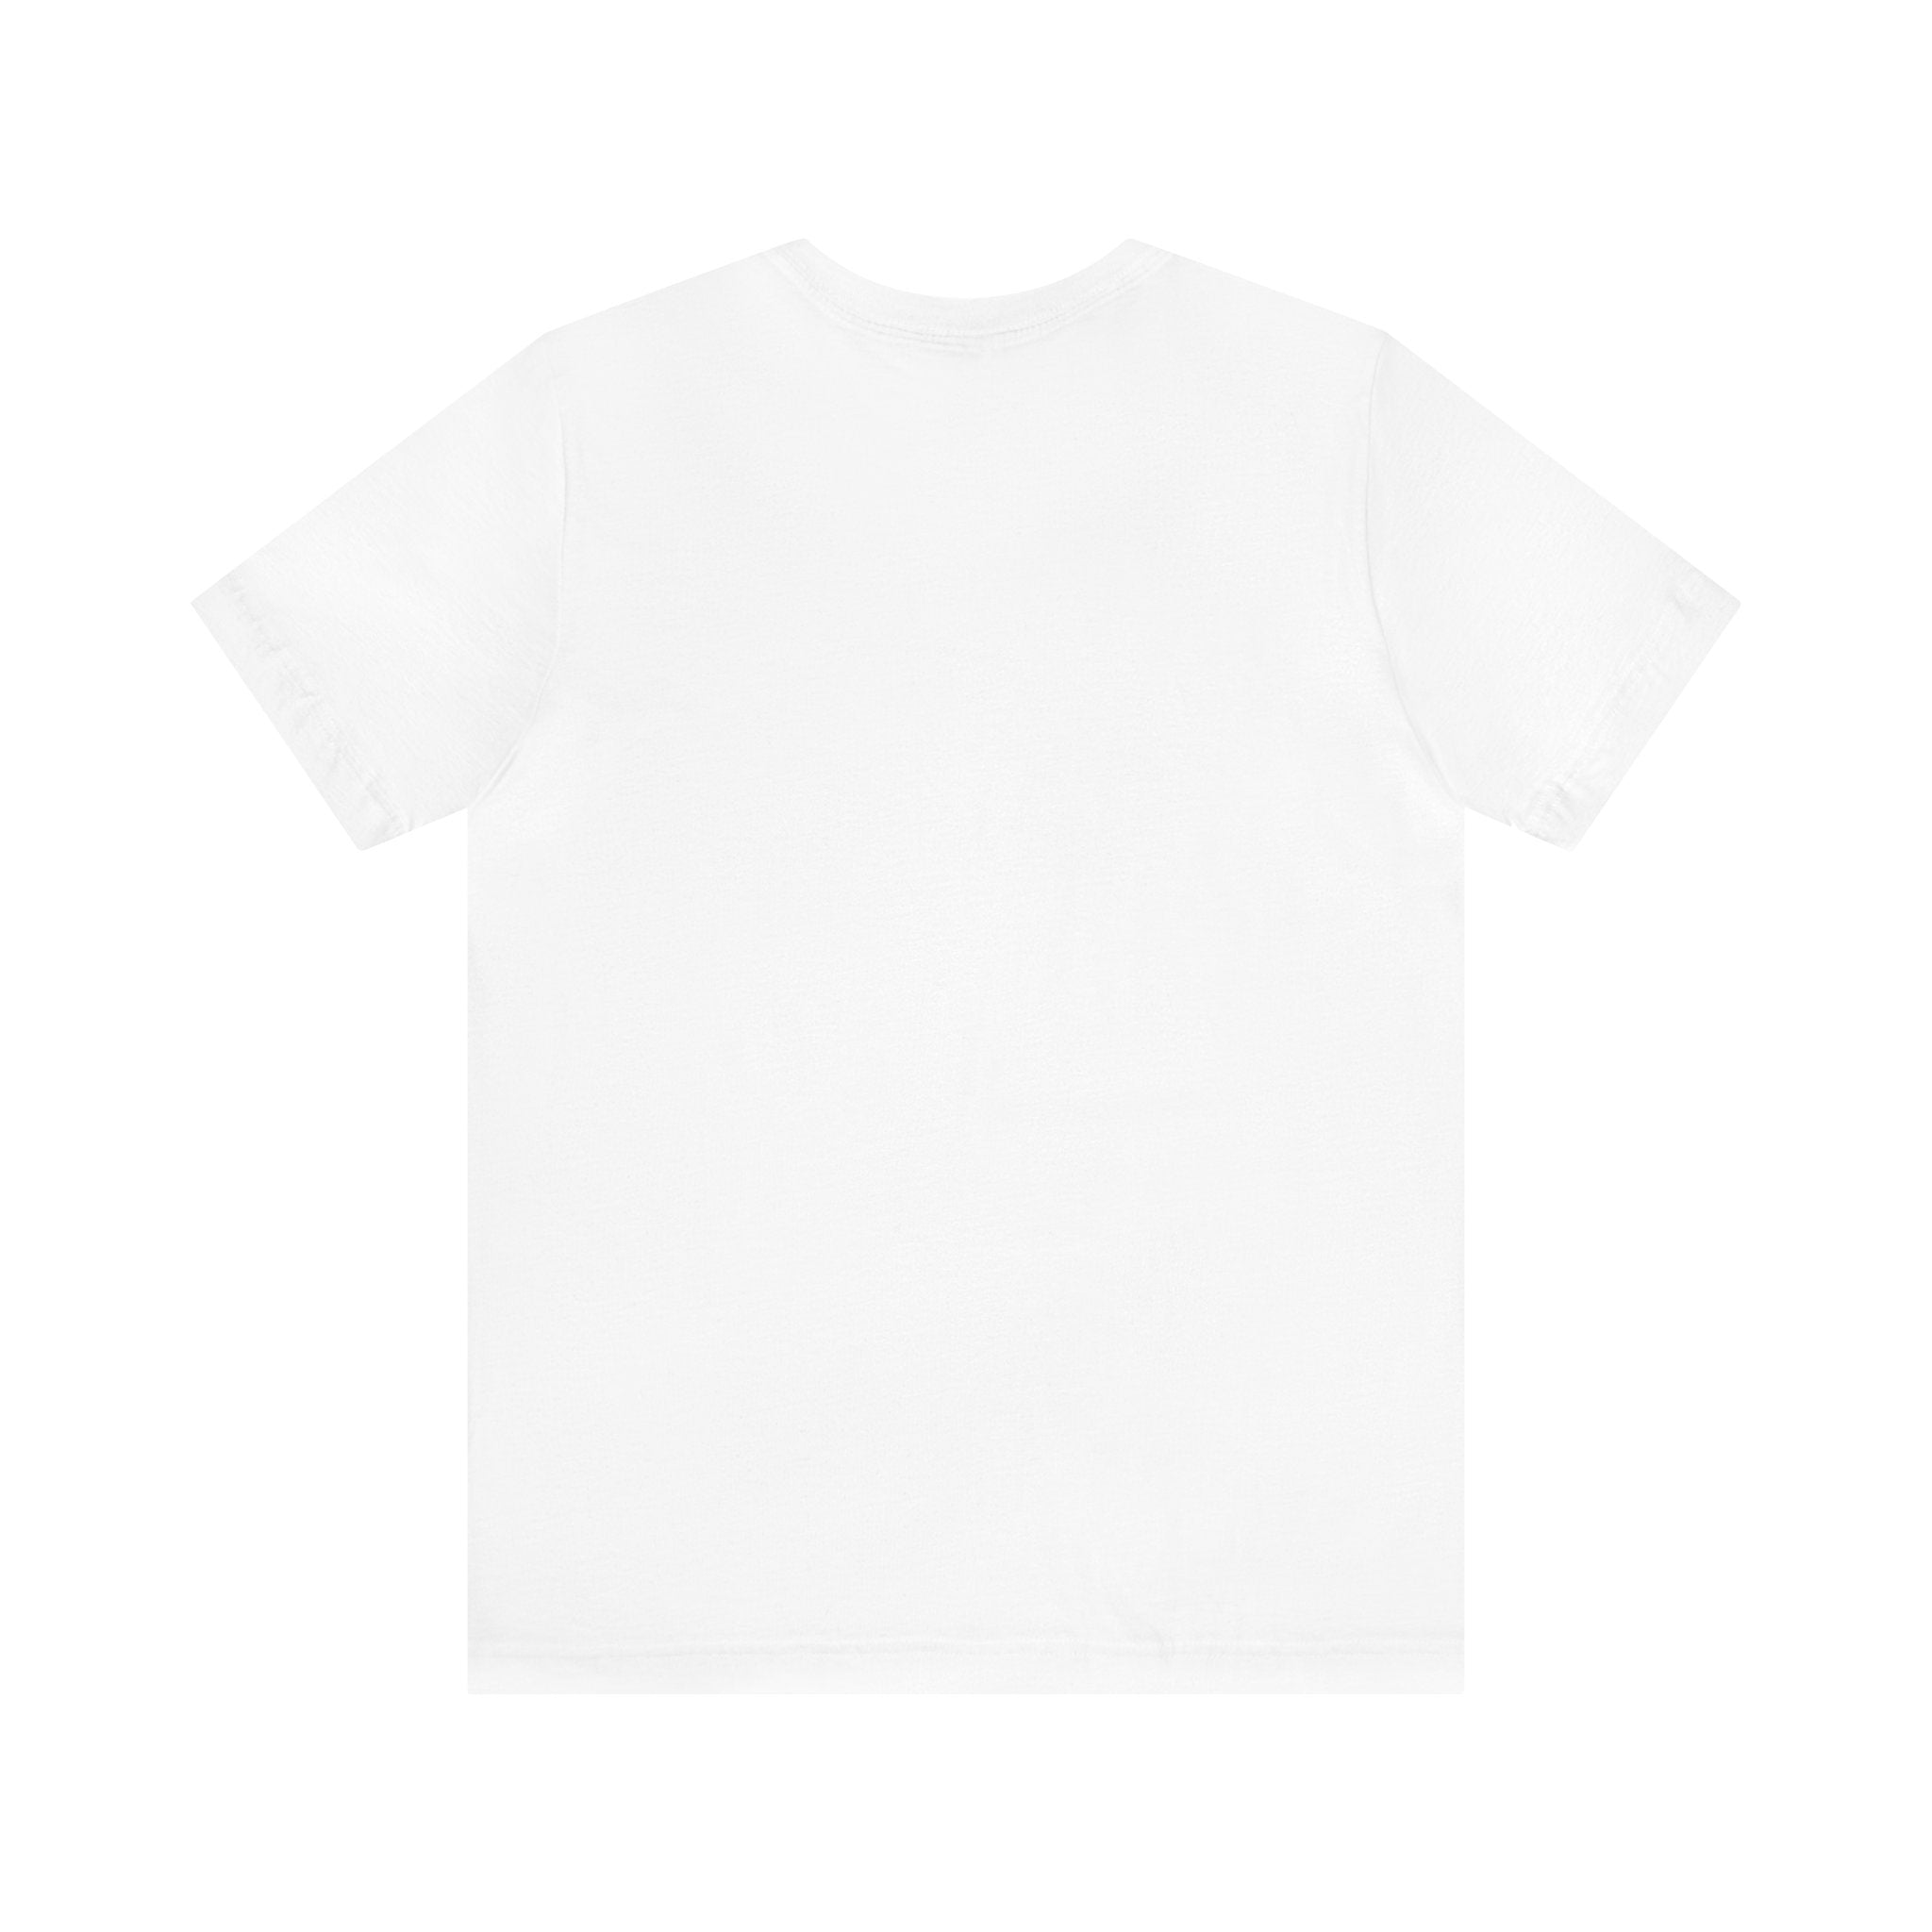 A "I'm Not Listening T- Shirt" on a white background.